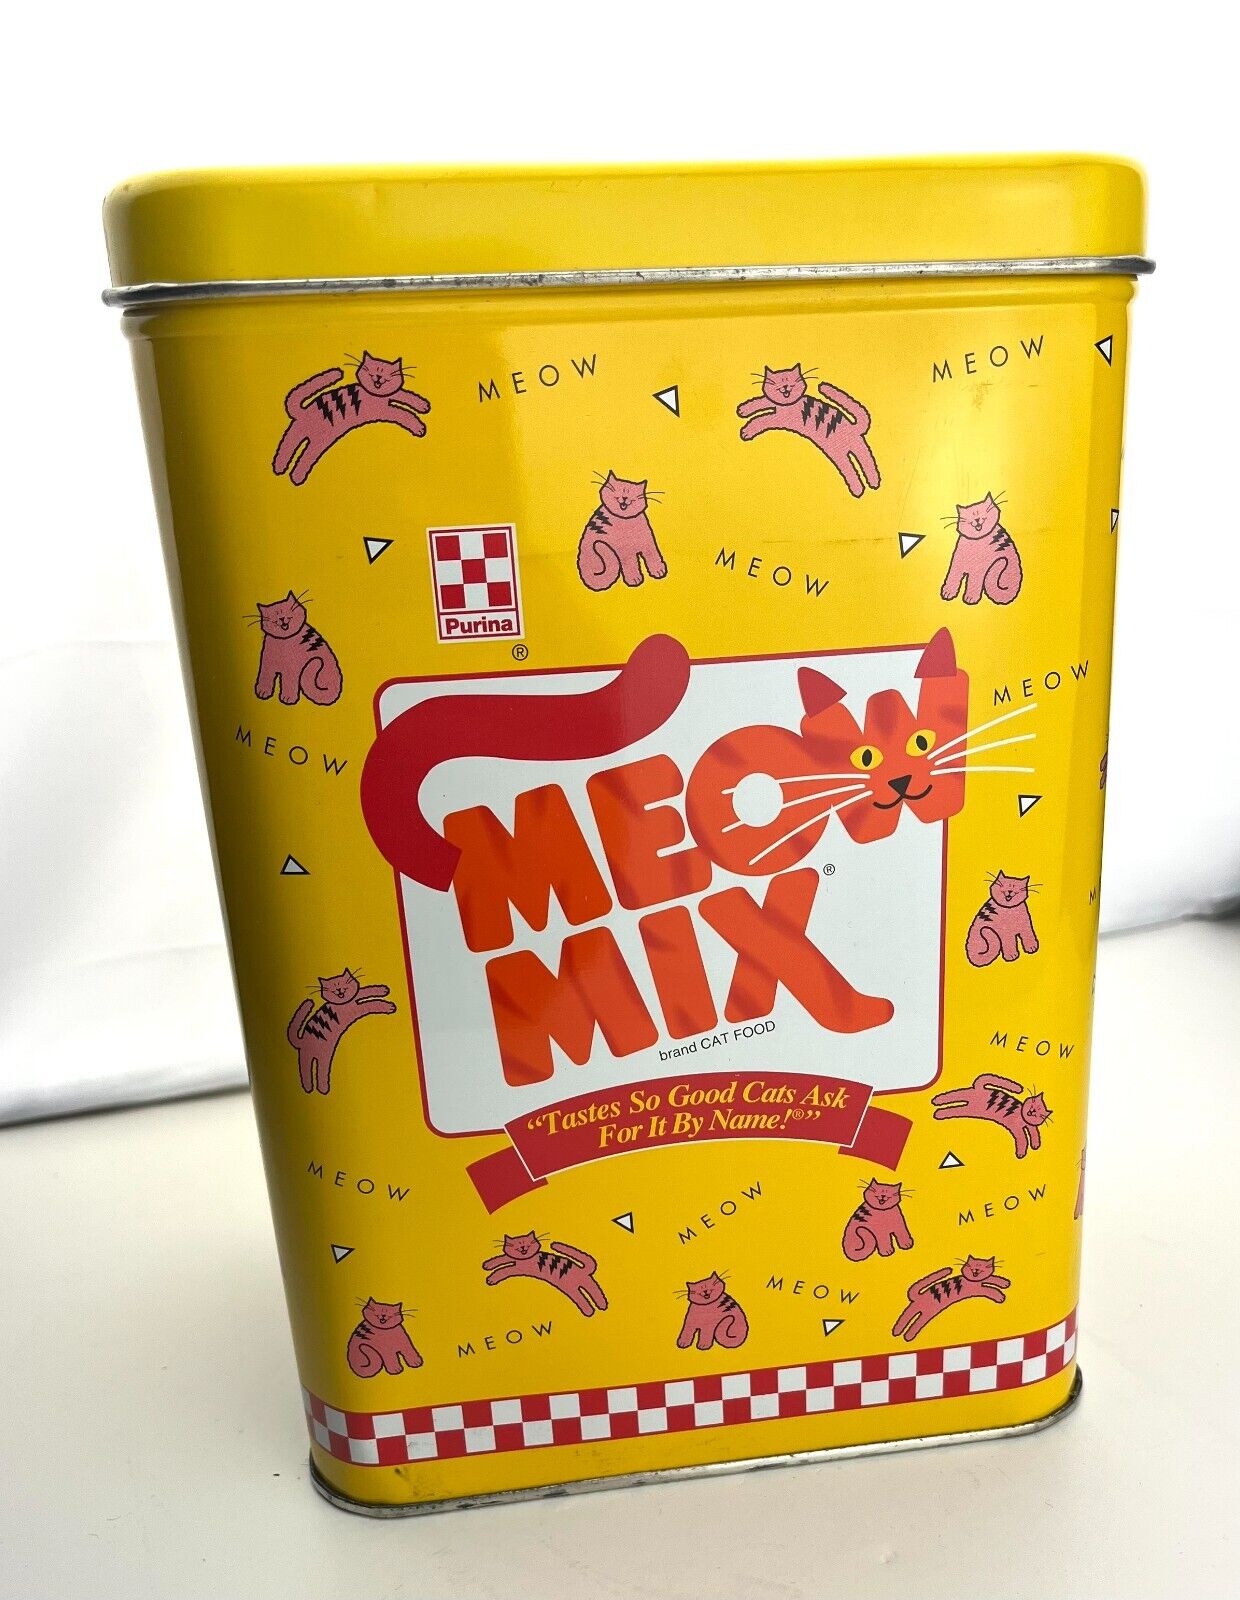 Purina MEOW MIX TIN Collectible 1996 Cat Food Canister Vintage Advertising